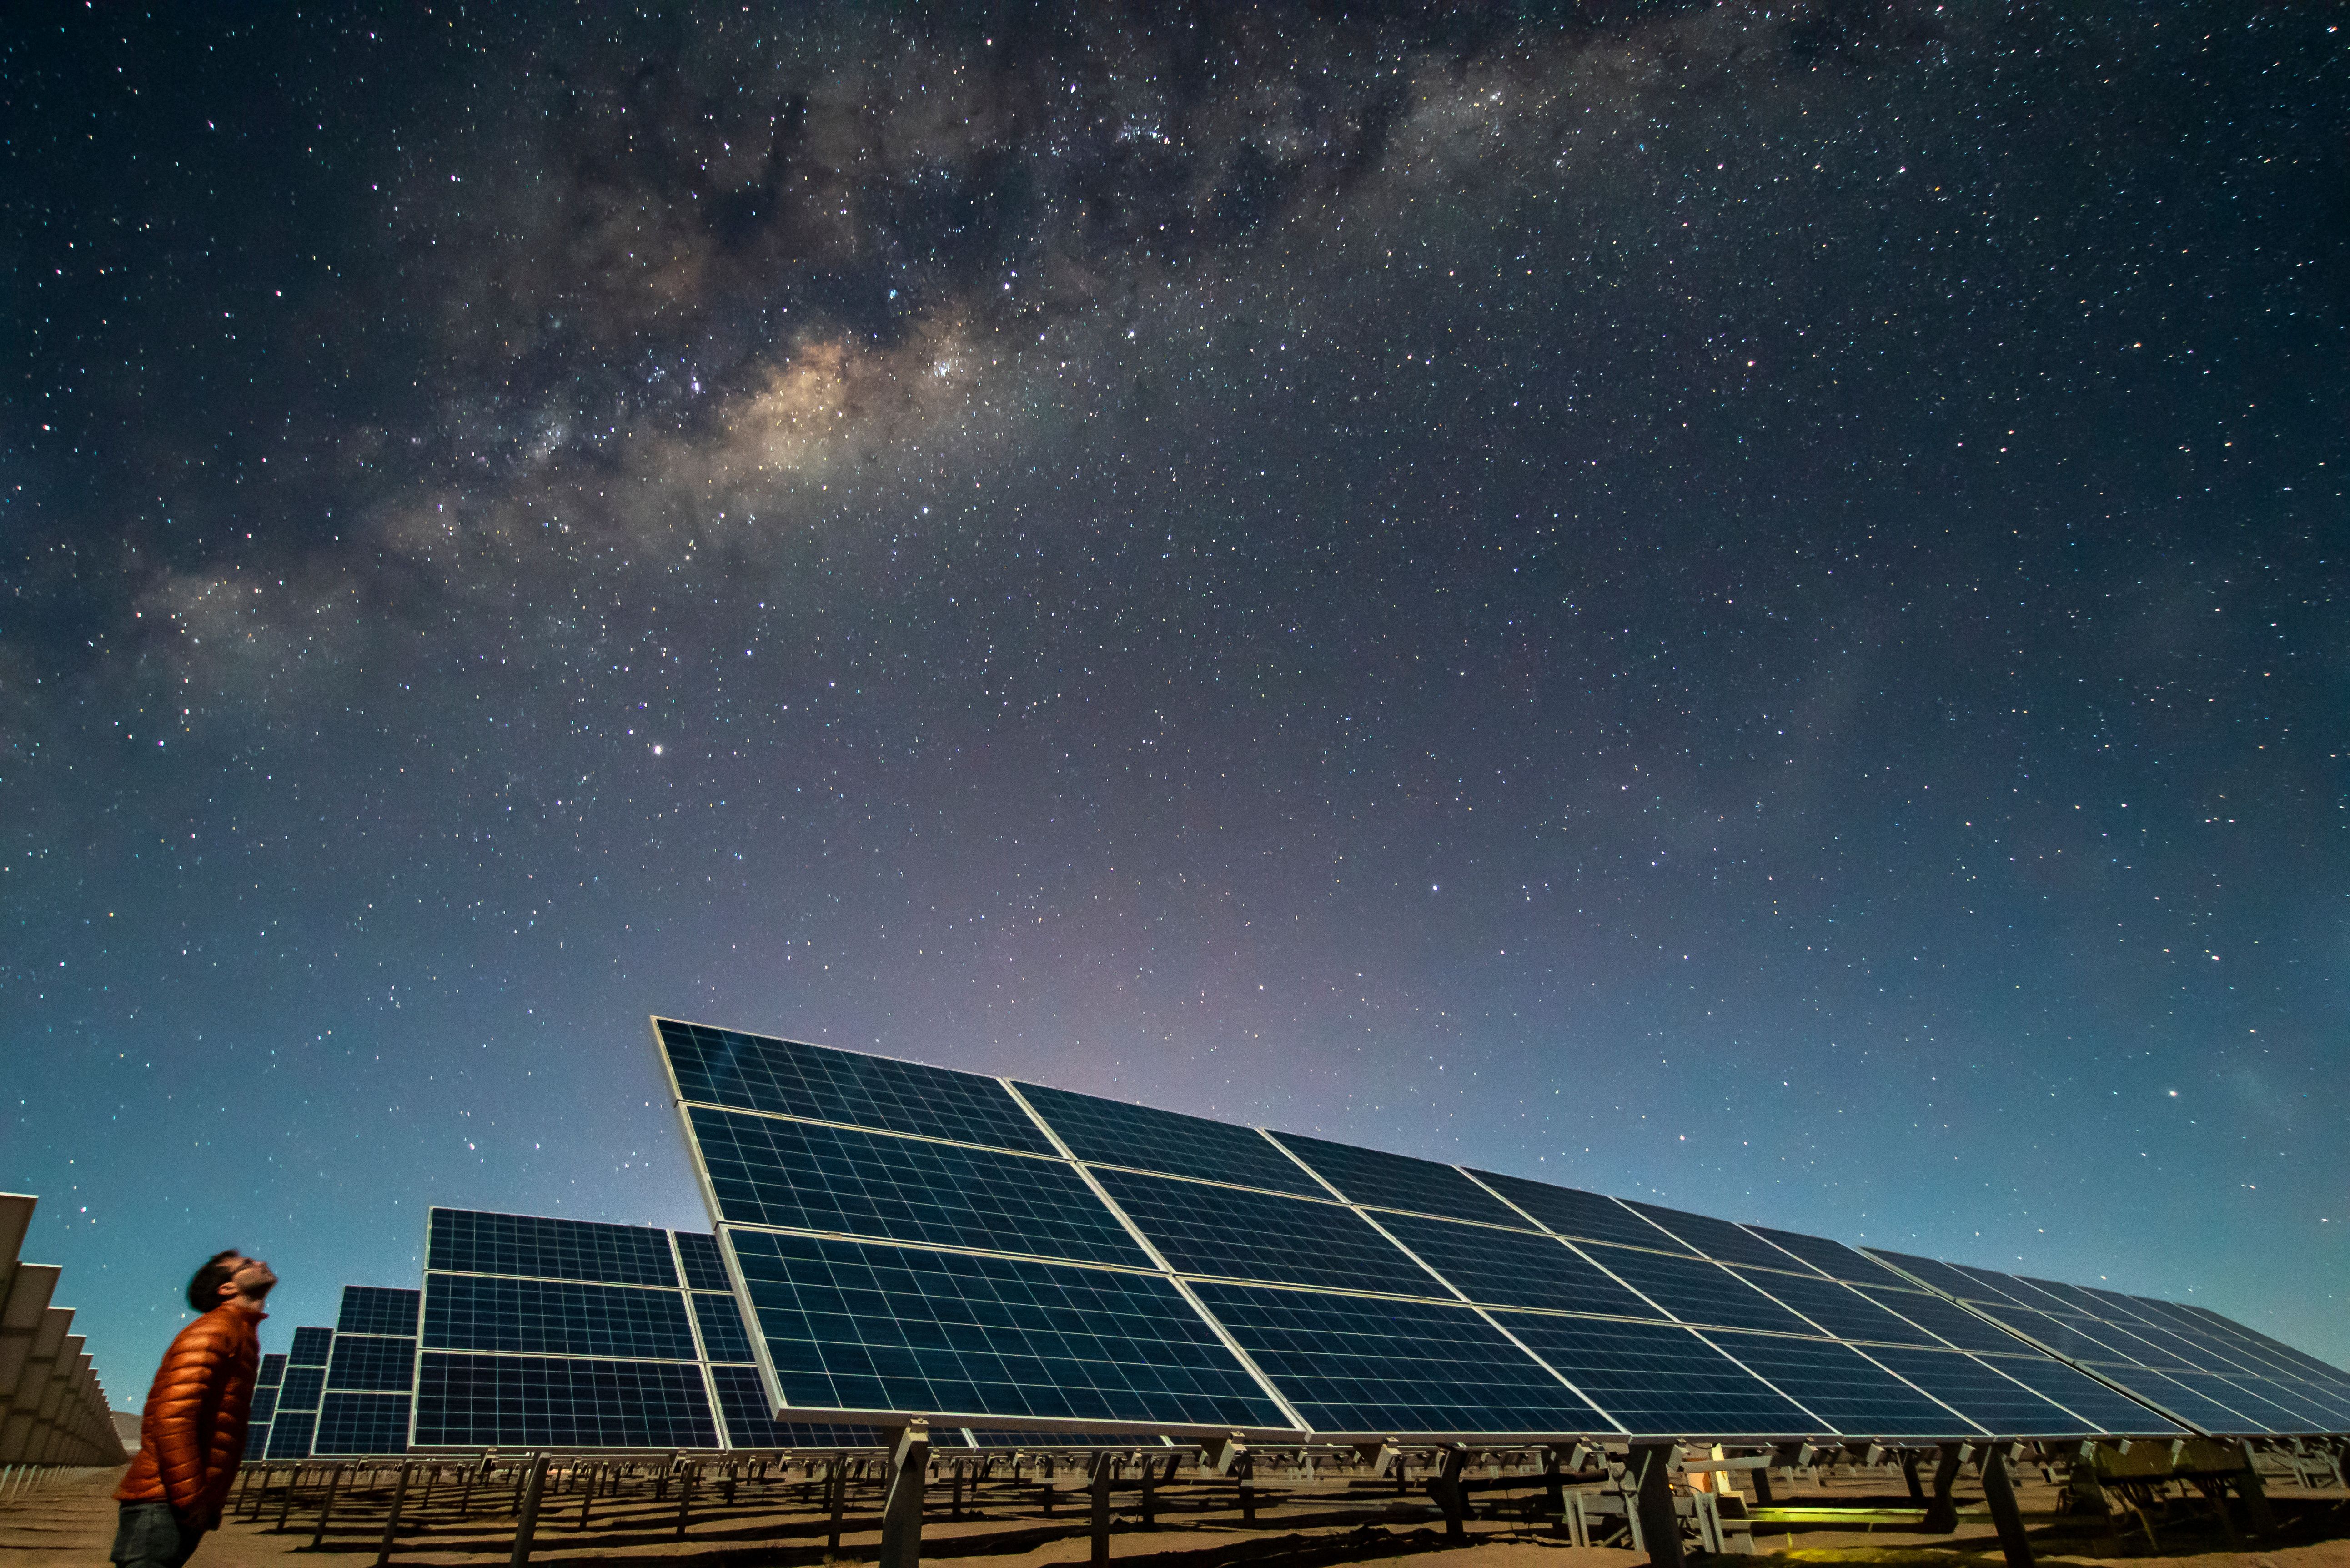 A man stands next to large groundmount solar panels and looks up at the night sky.